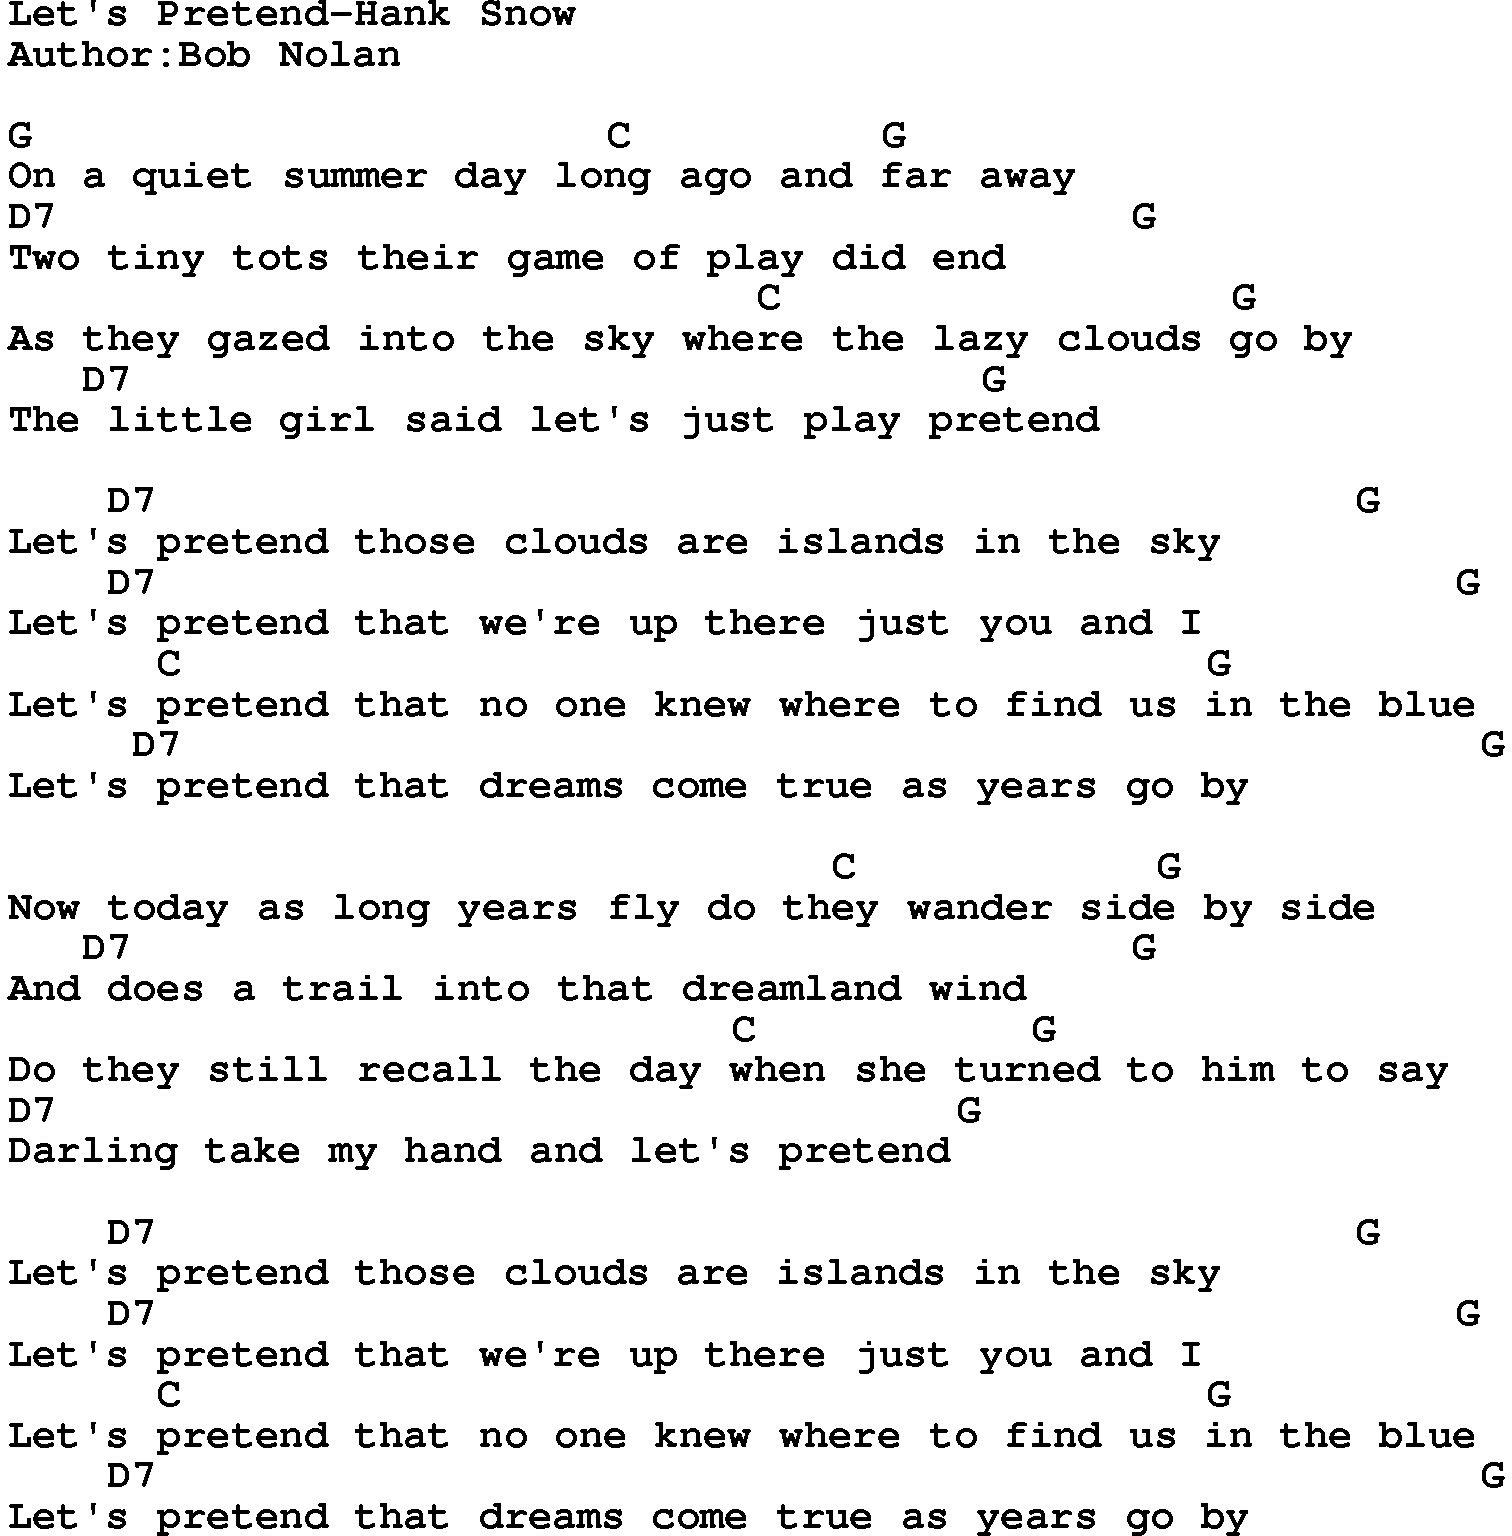 Country music song: Let's Pretend-Hank Snow lyrics and chords